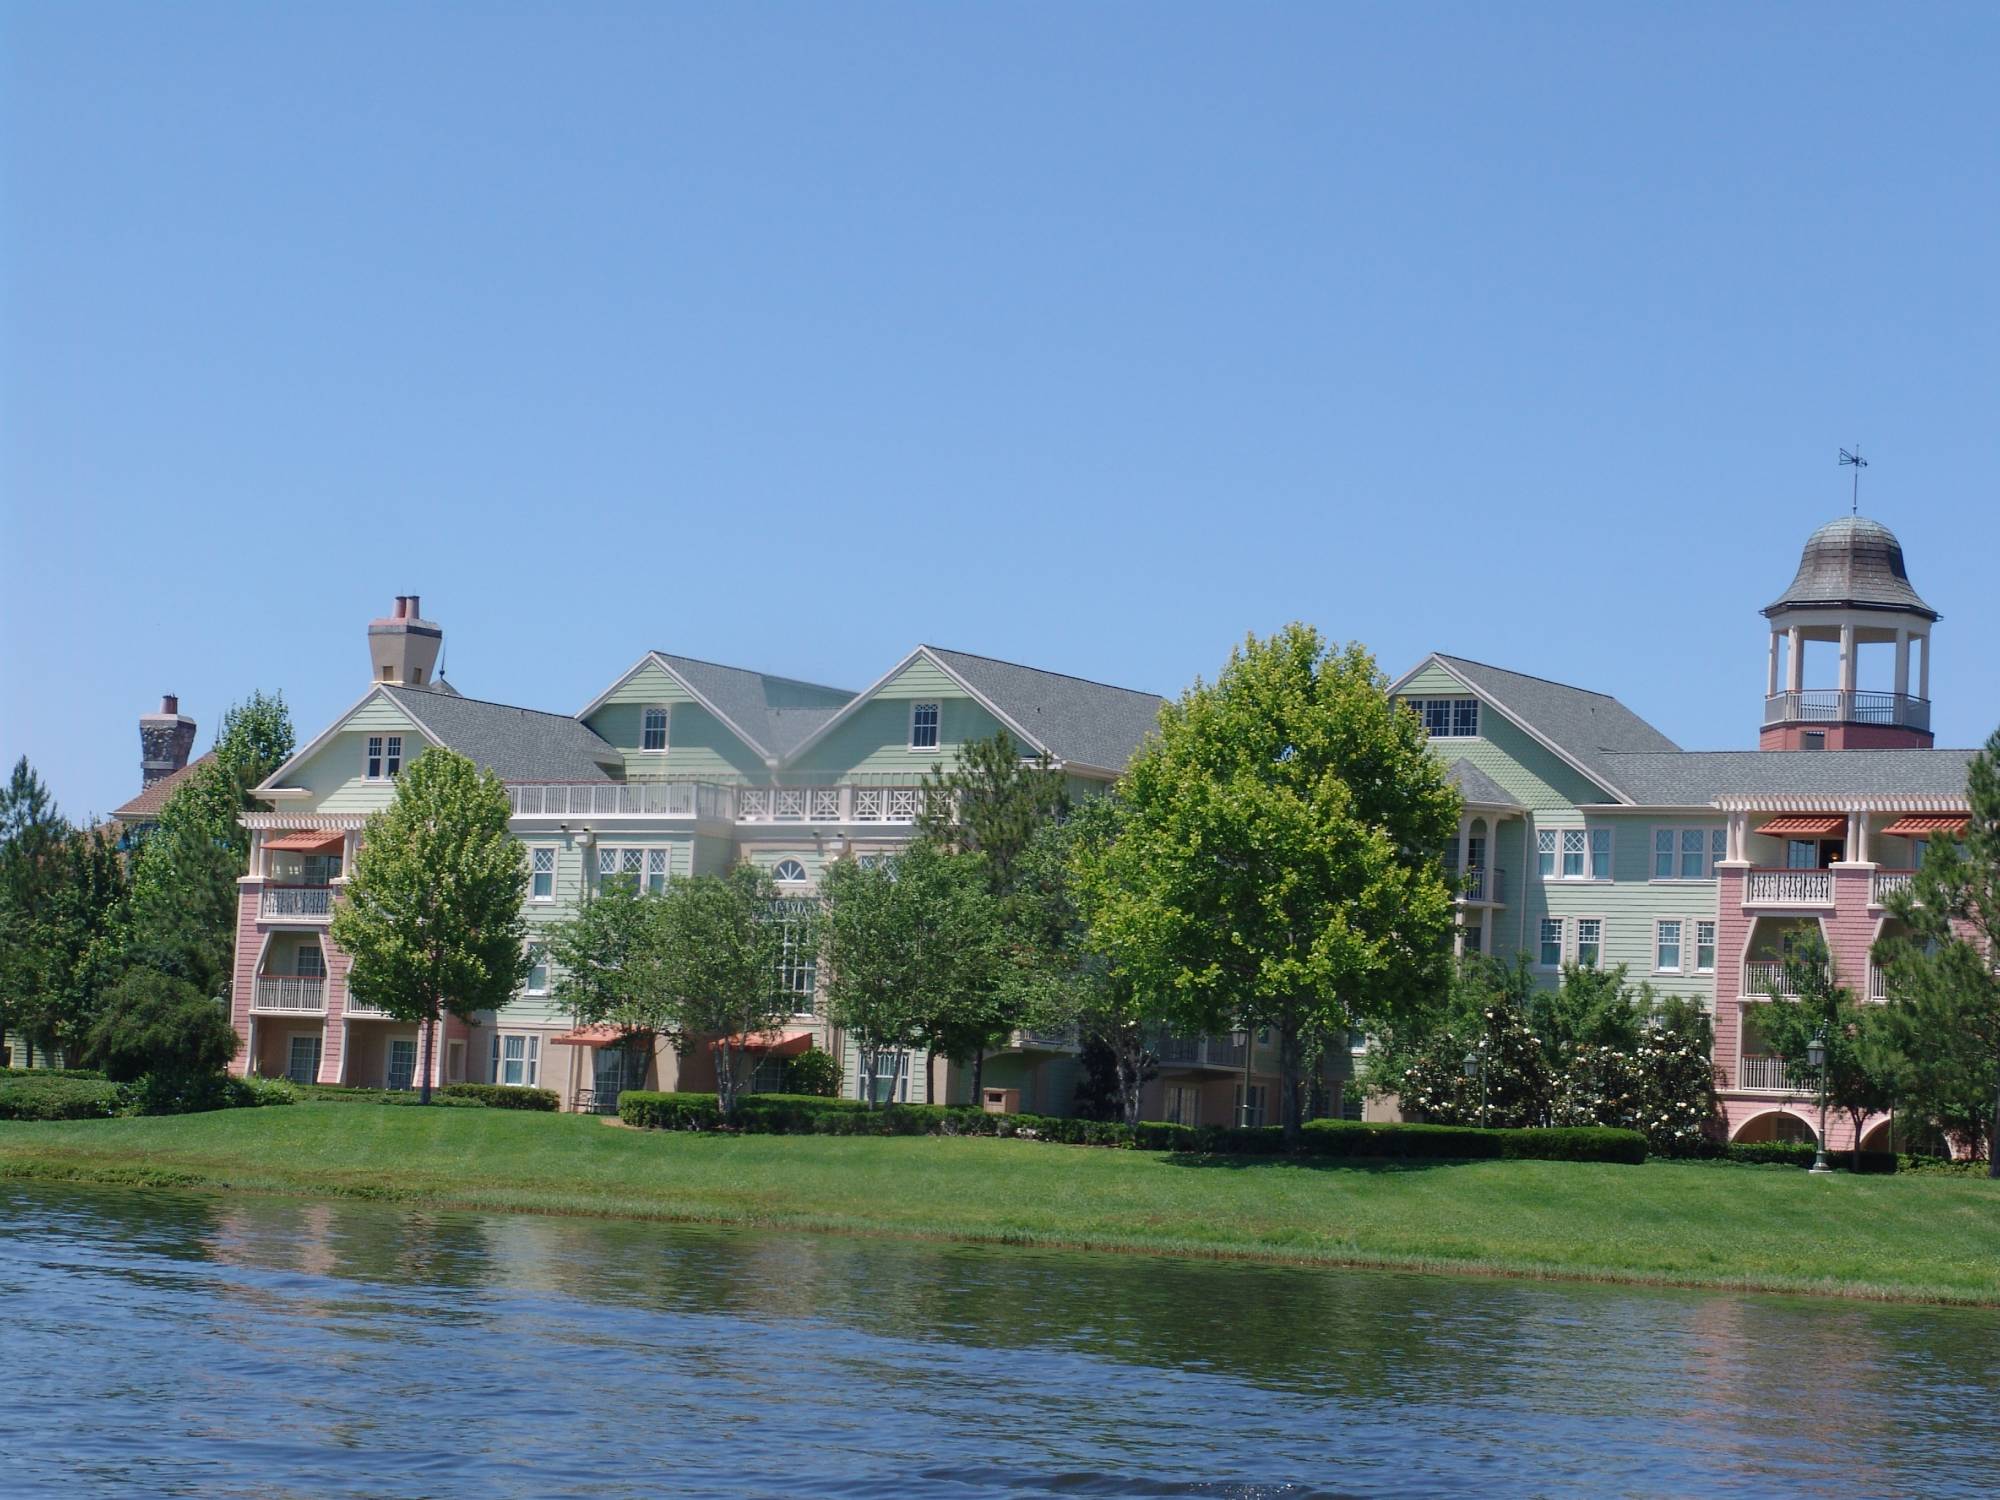 Saratoga Springs - as seen from Downtown Disney lake